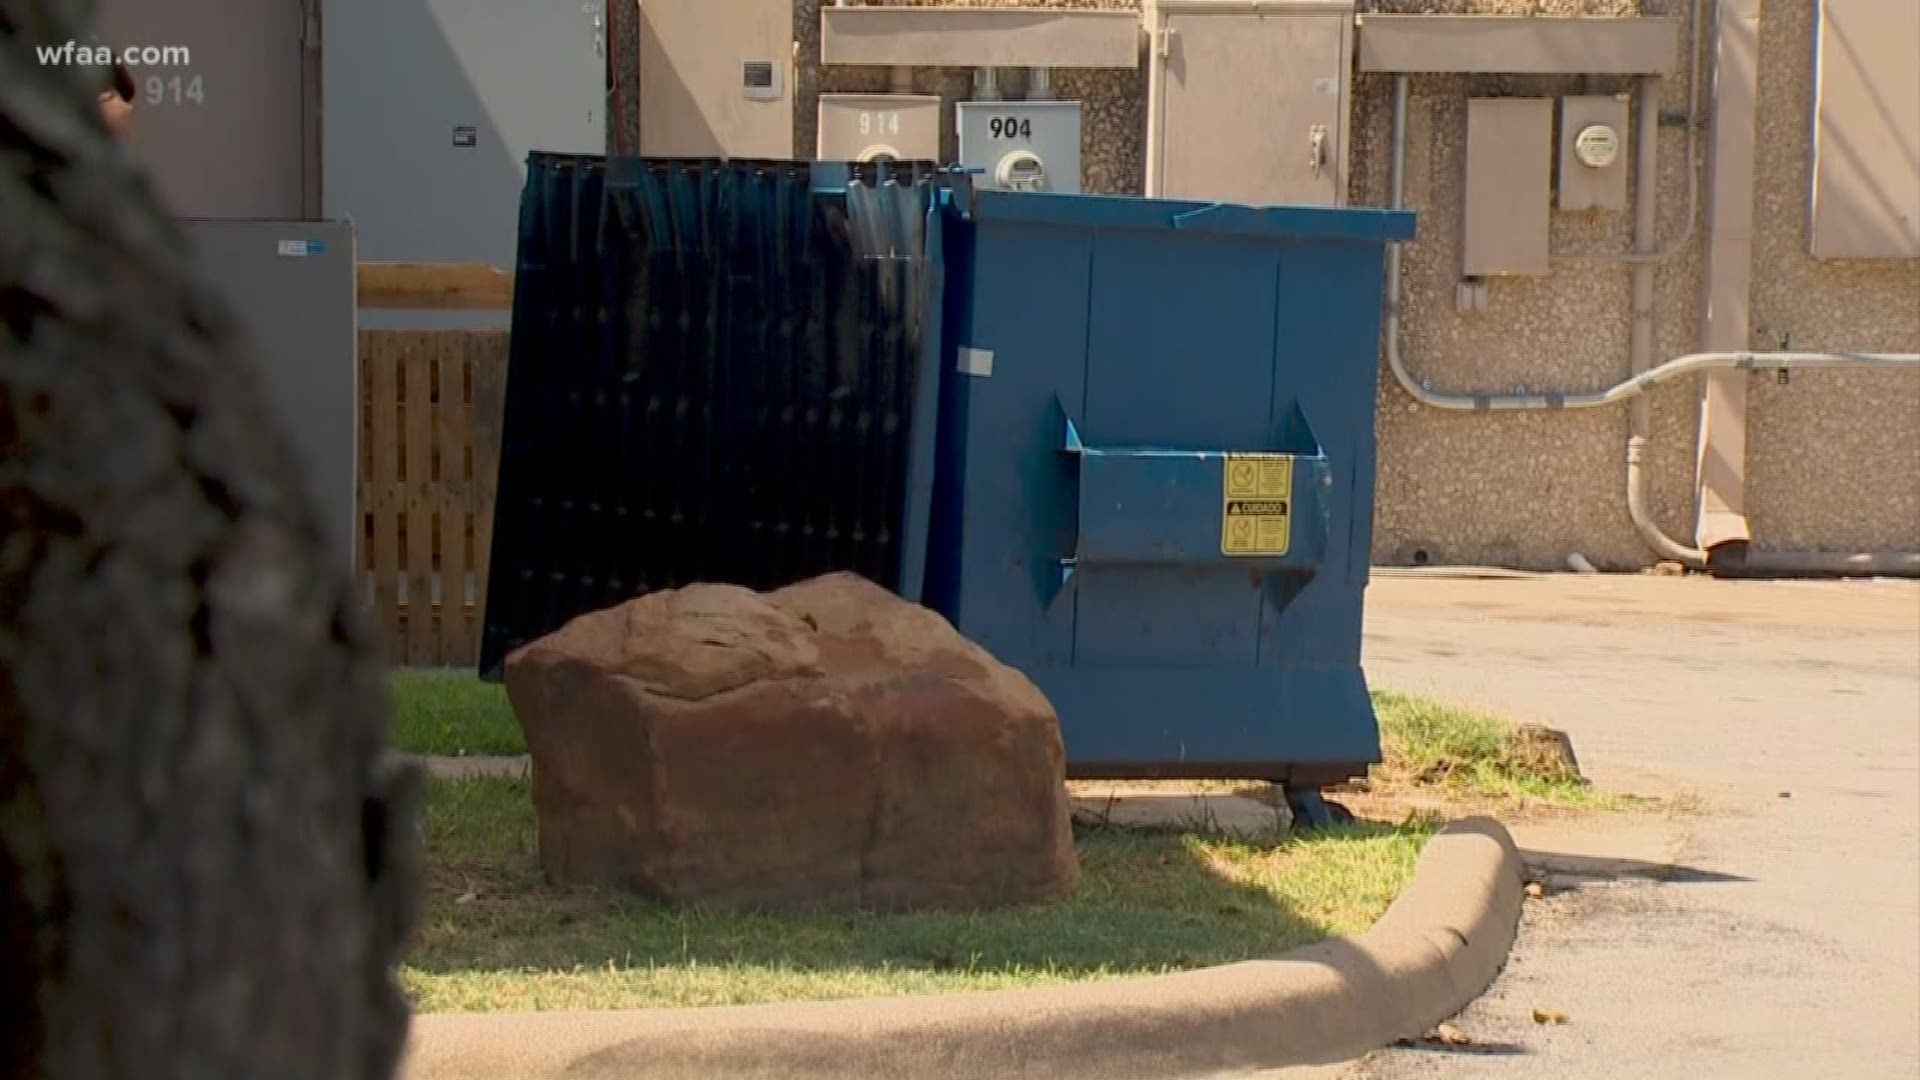 Police question mother of newborn found in dumpster